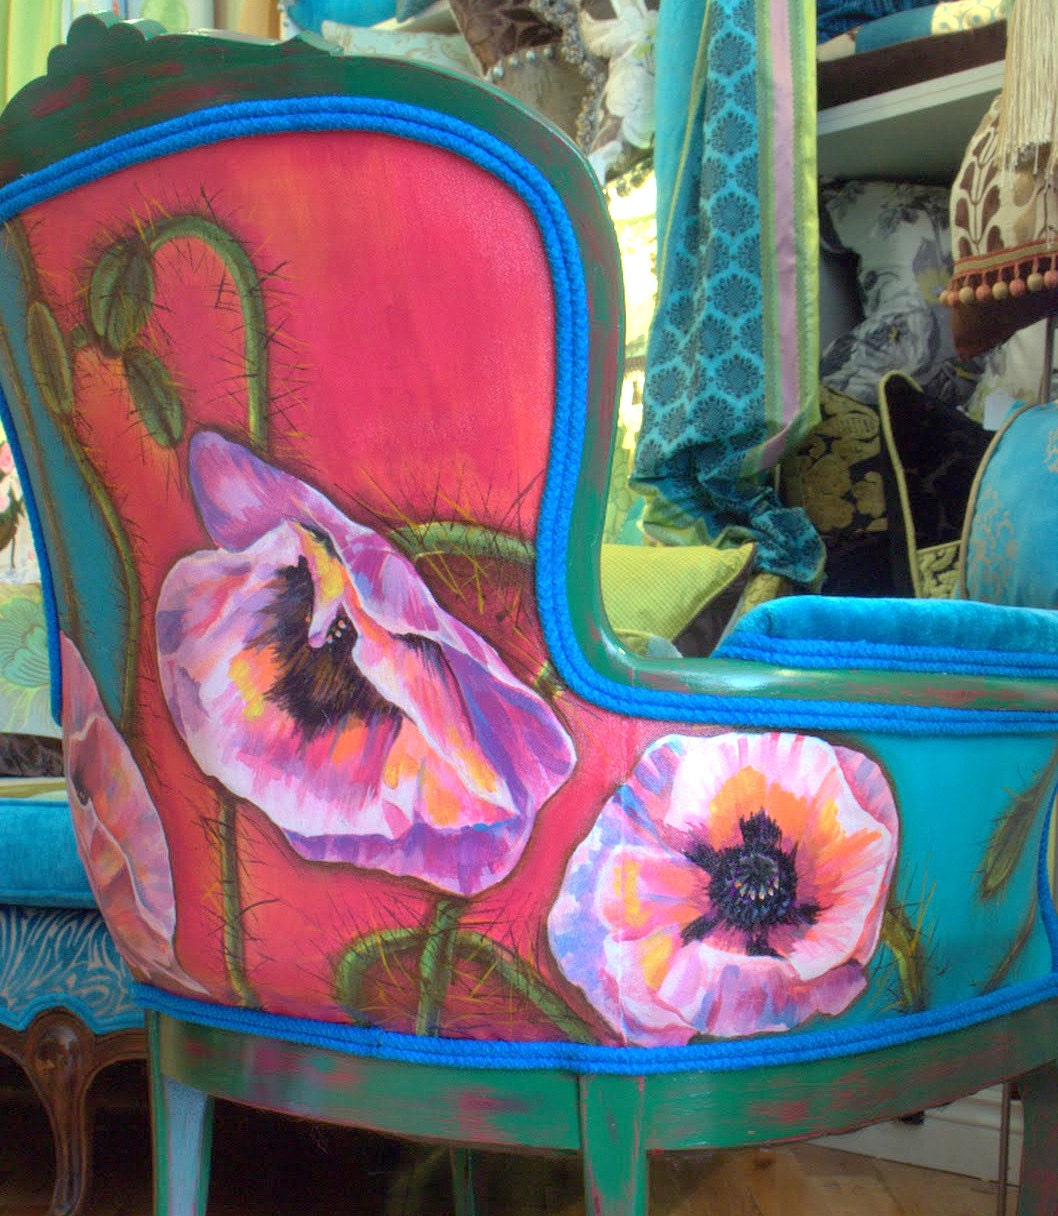 Painting Upholstered Furniture by My Repurposed Life